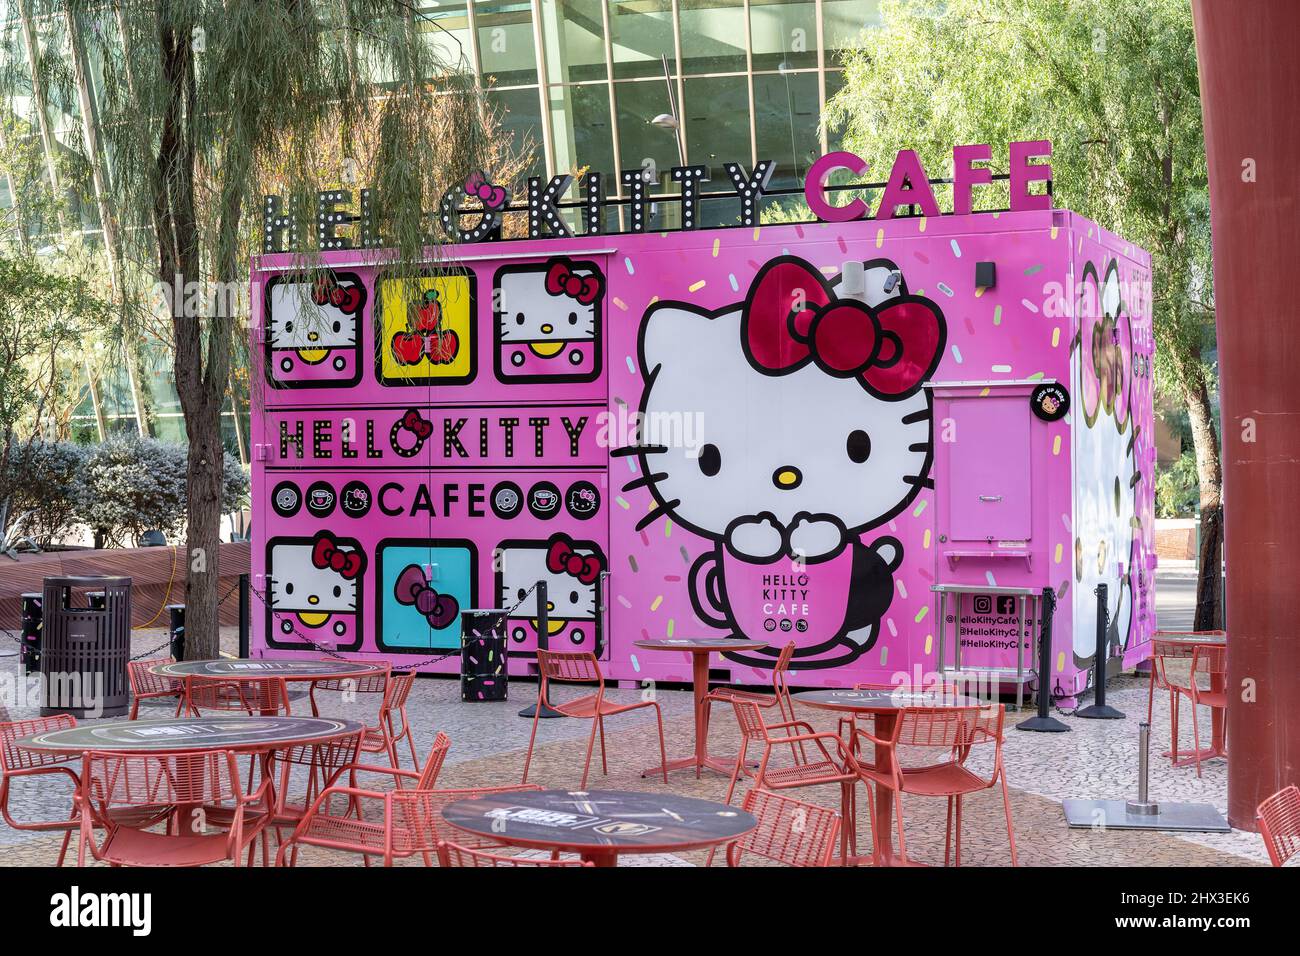 New Hello Kitty Cafe pop-up now open in Las Vegas